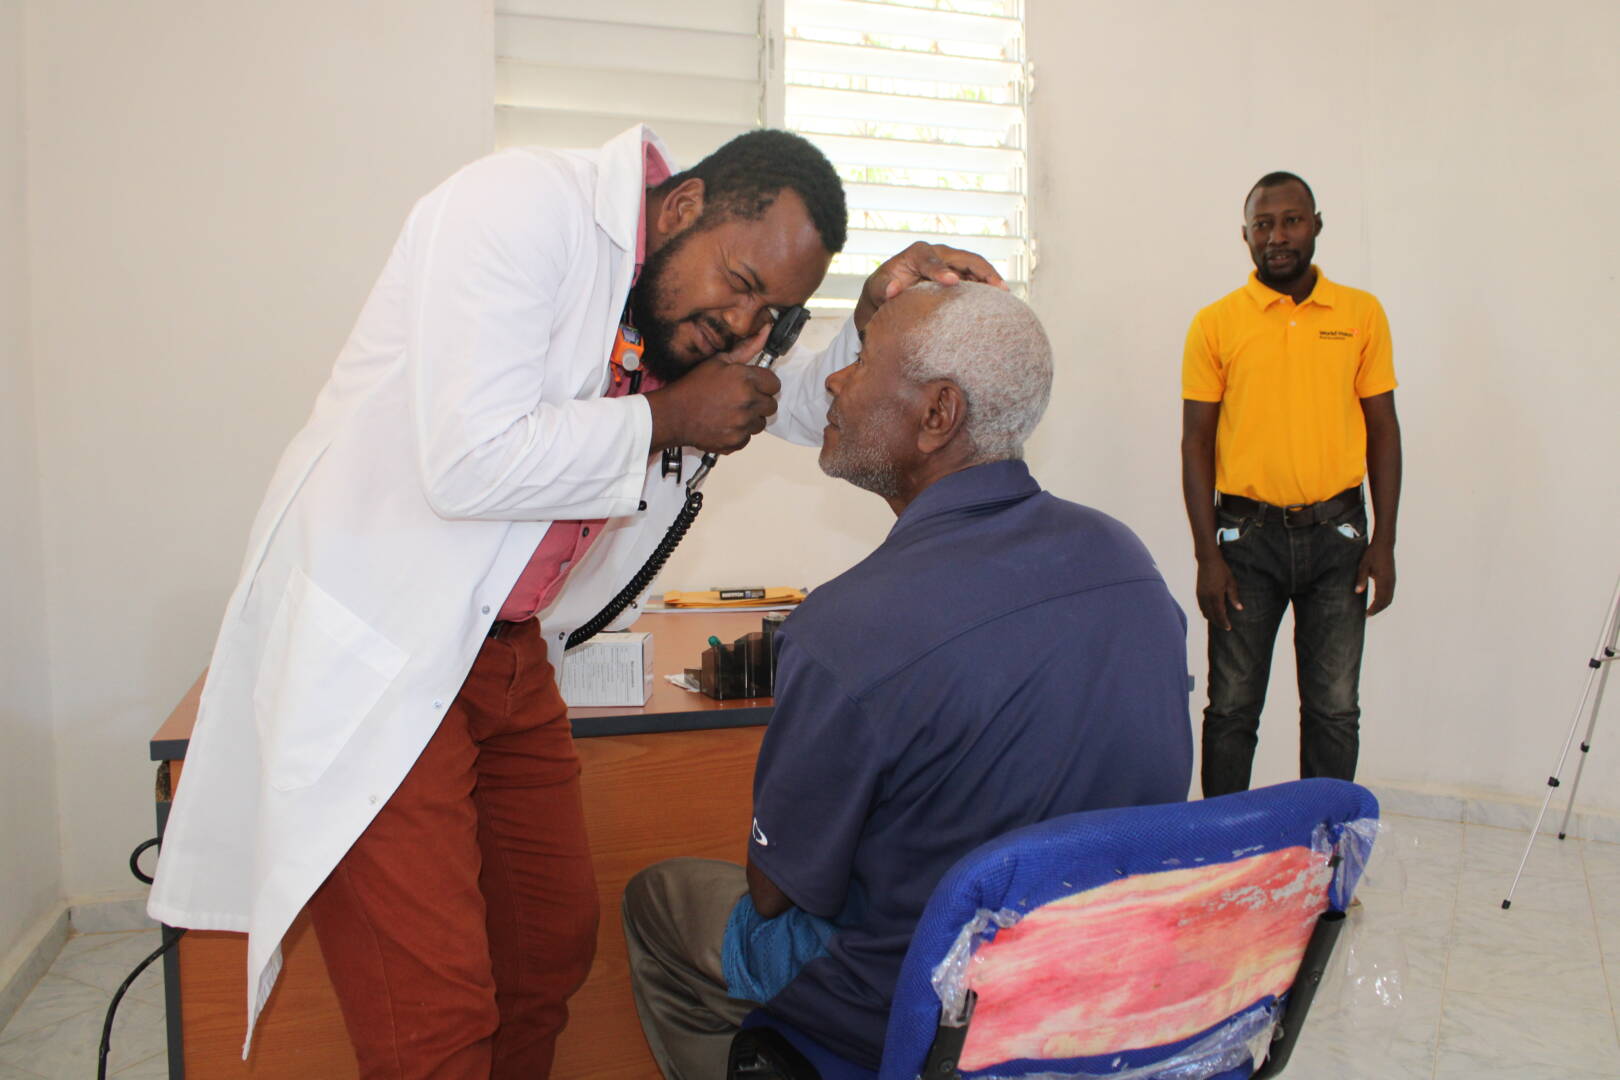 A man in a white lab coat uses a small black device to look into the eyes of an older seated man.